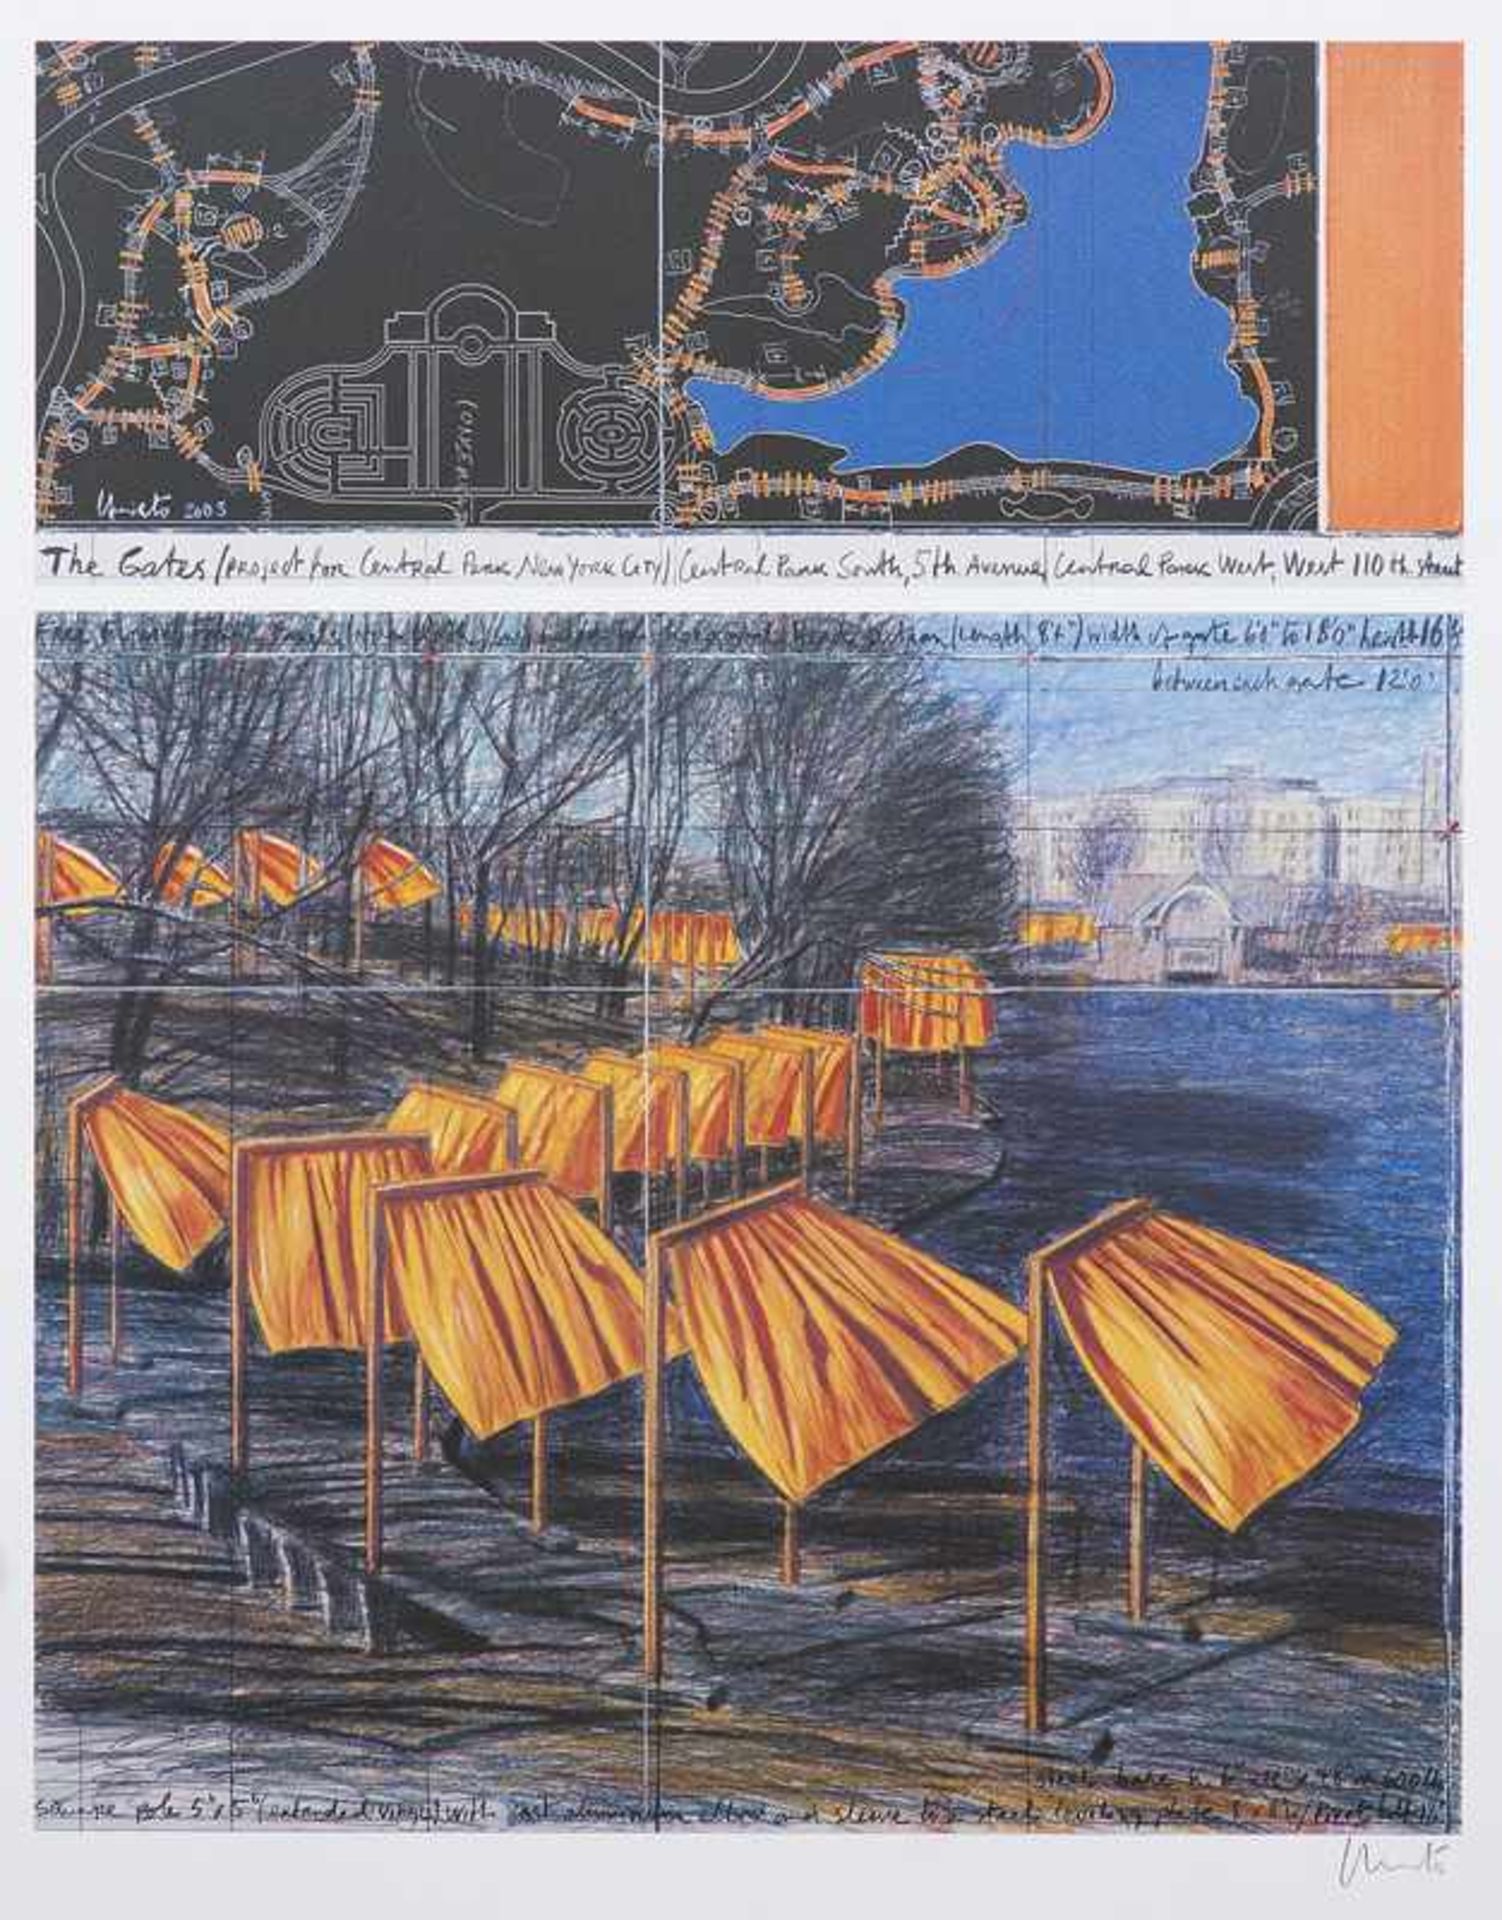 Christo (d. i. Chr. Javacheff). (1935 Gabrovo/Bulgarien). The Gates. Project for Central Park, VIII,